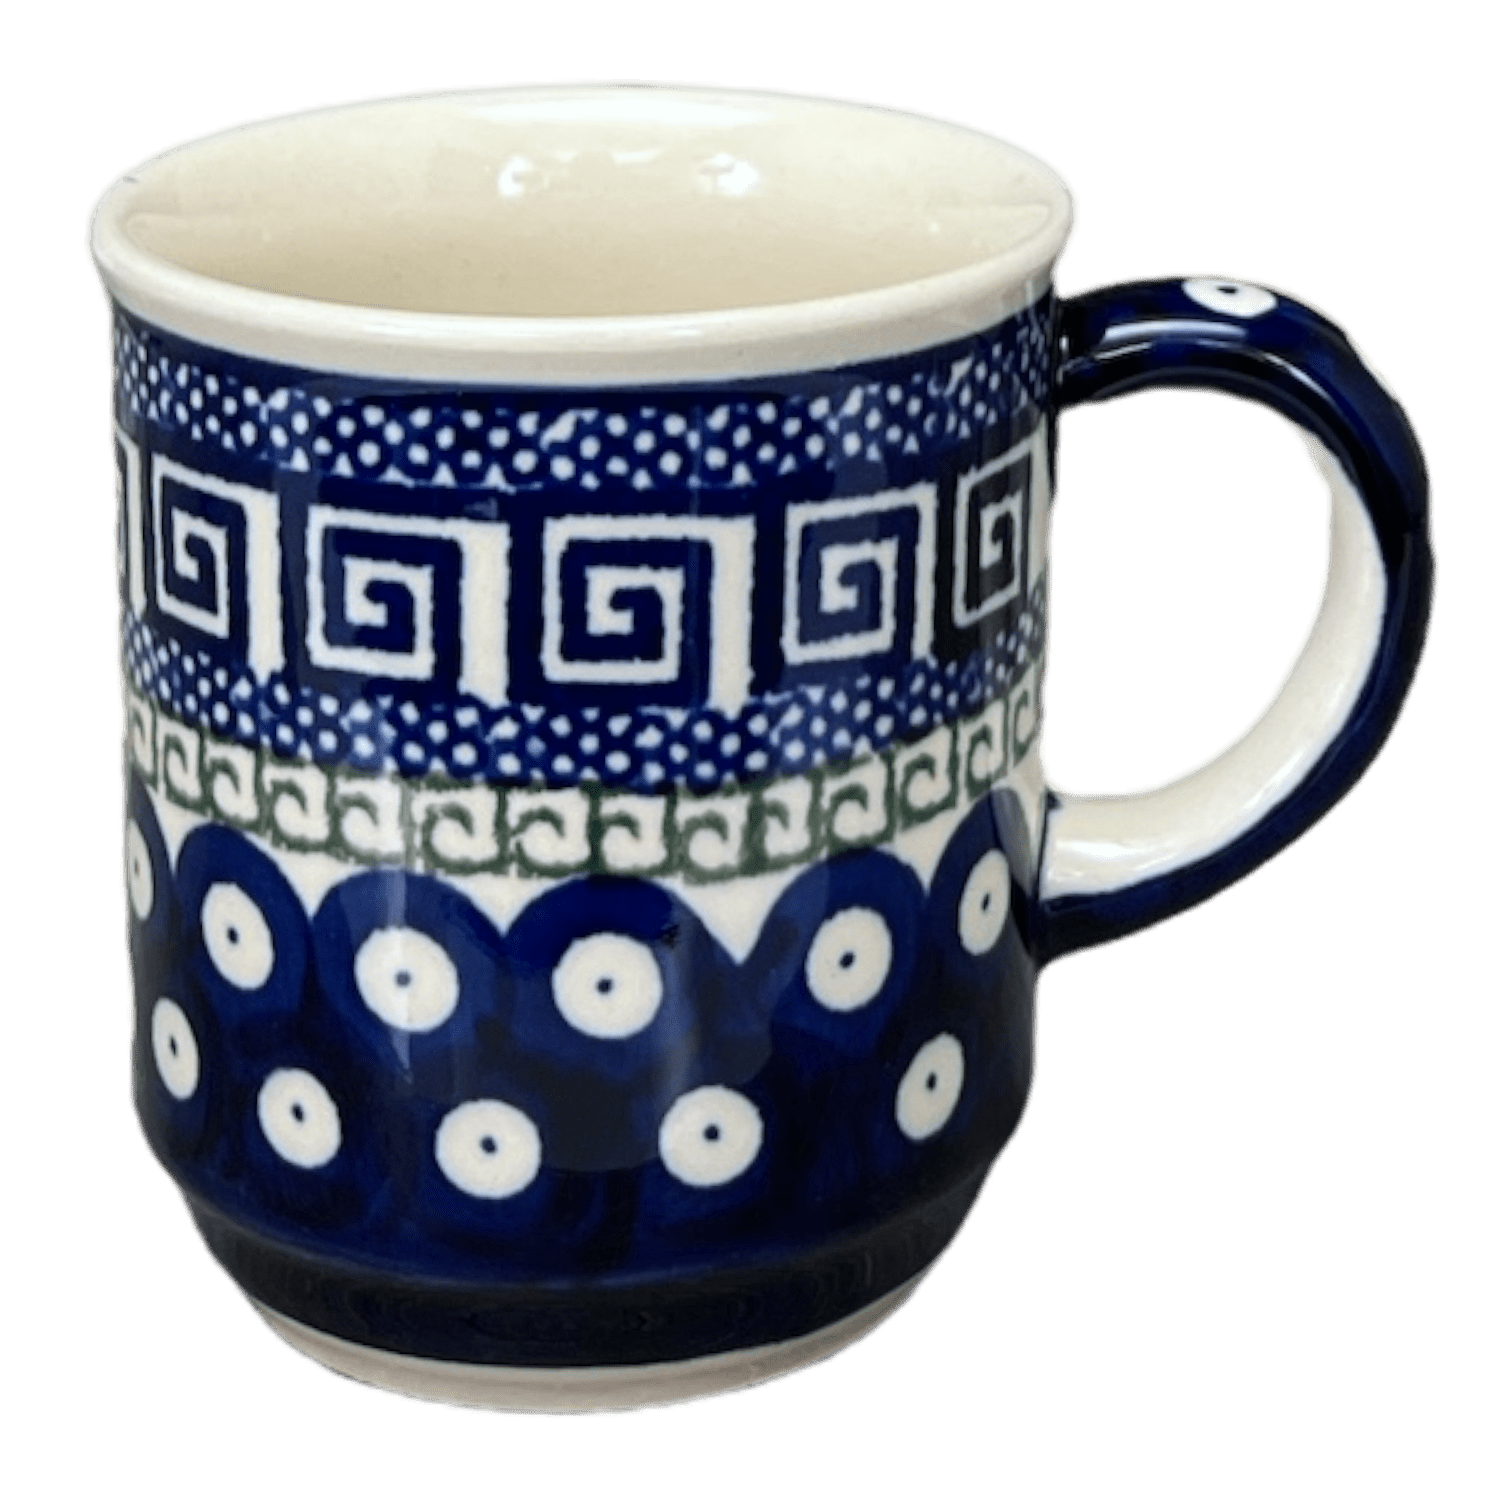 Colored Dot Coffee Mugs – Set of 2 – From Spain – Ceramics and Gifts Made  in Spain Online